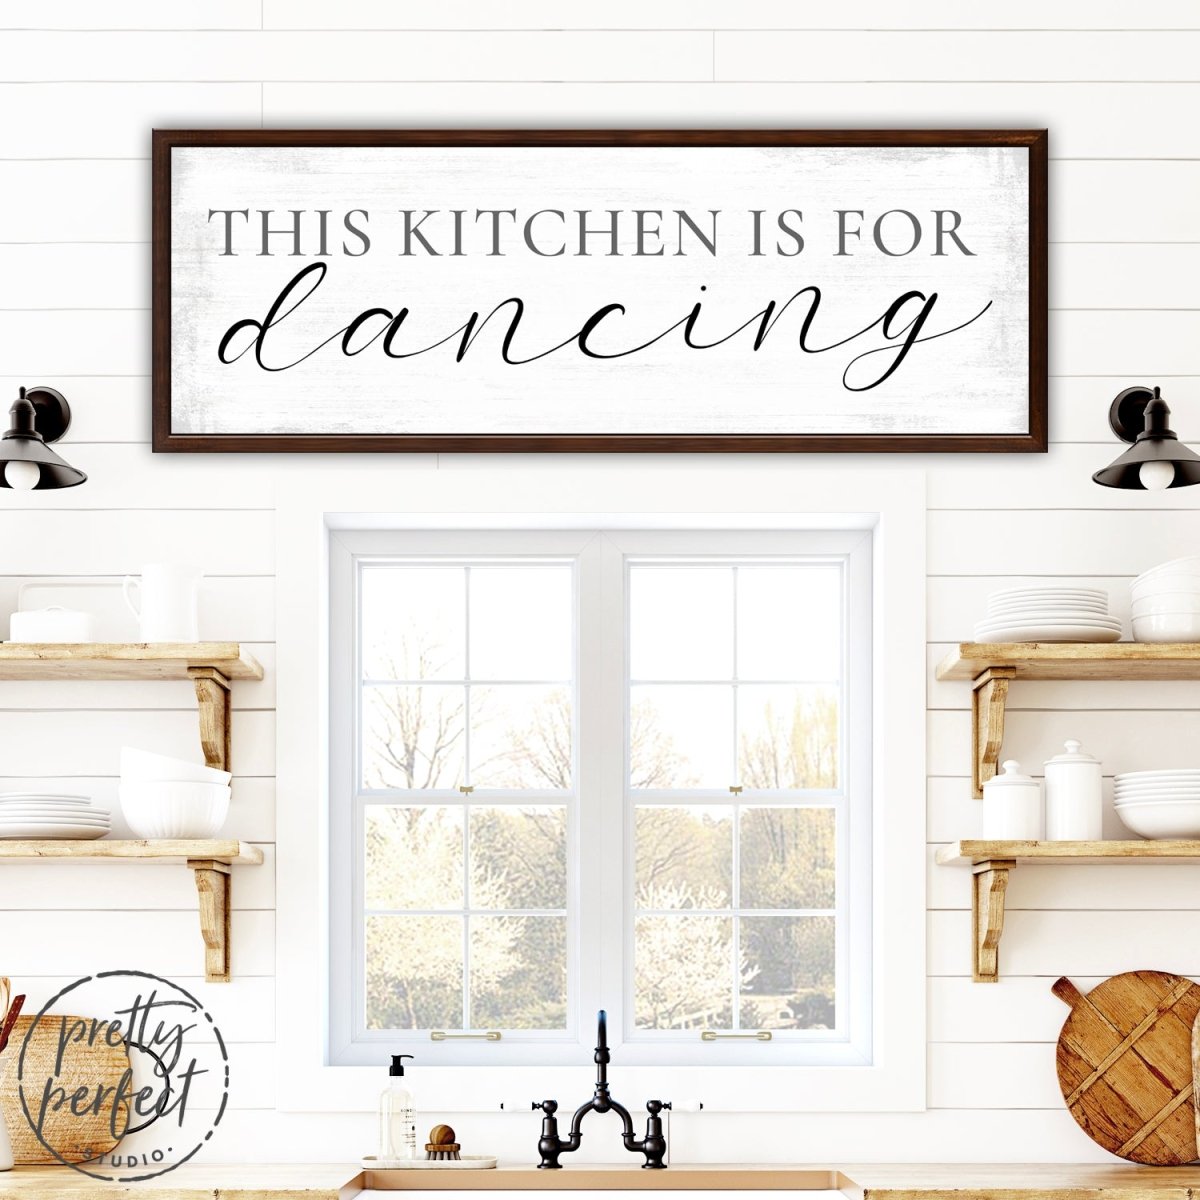 This Kitchen Is For Dancing Sign Over Kitchen Sink - Pretty Perfect Studio